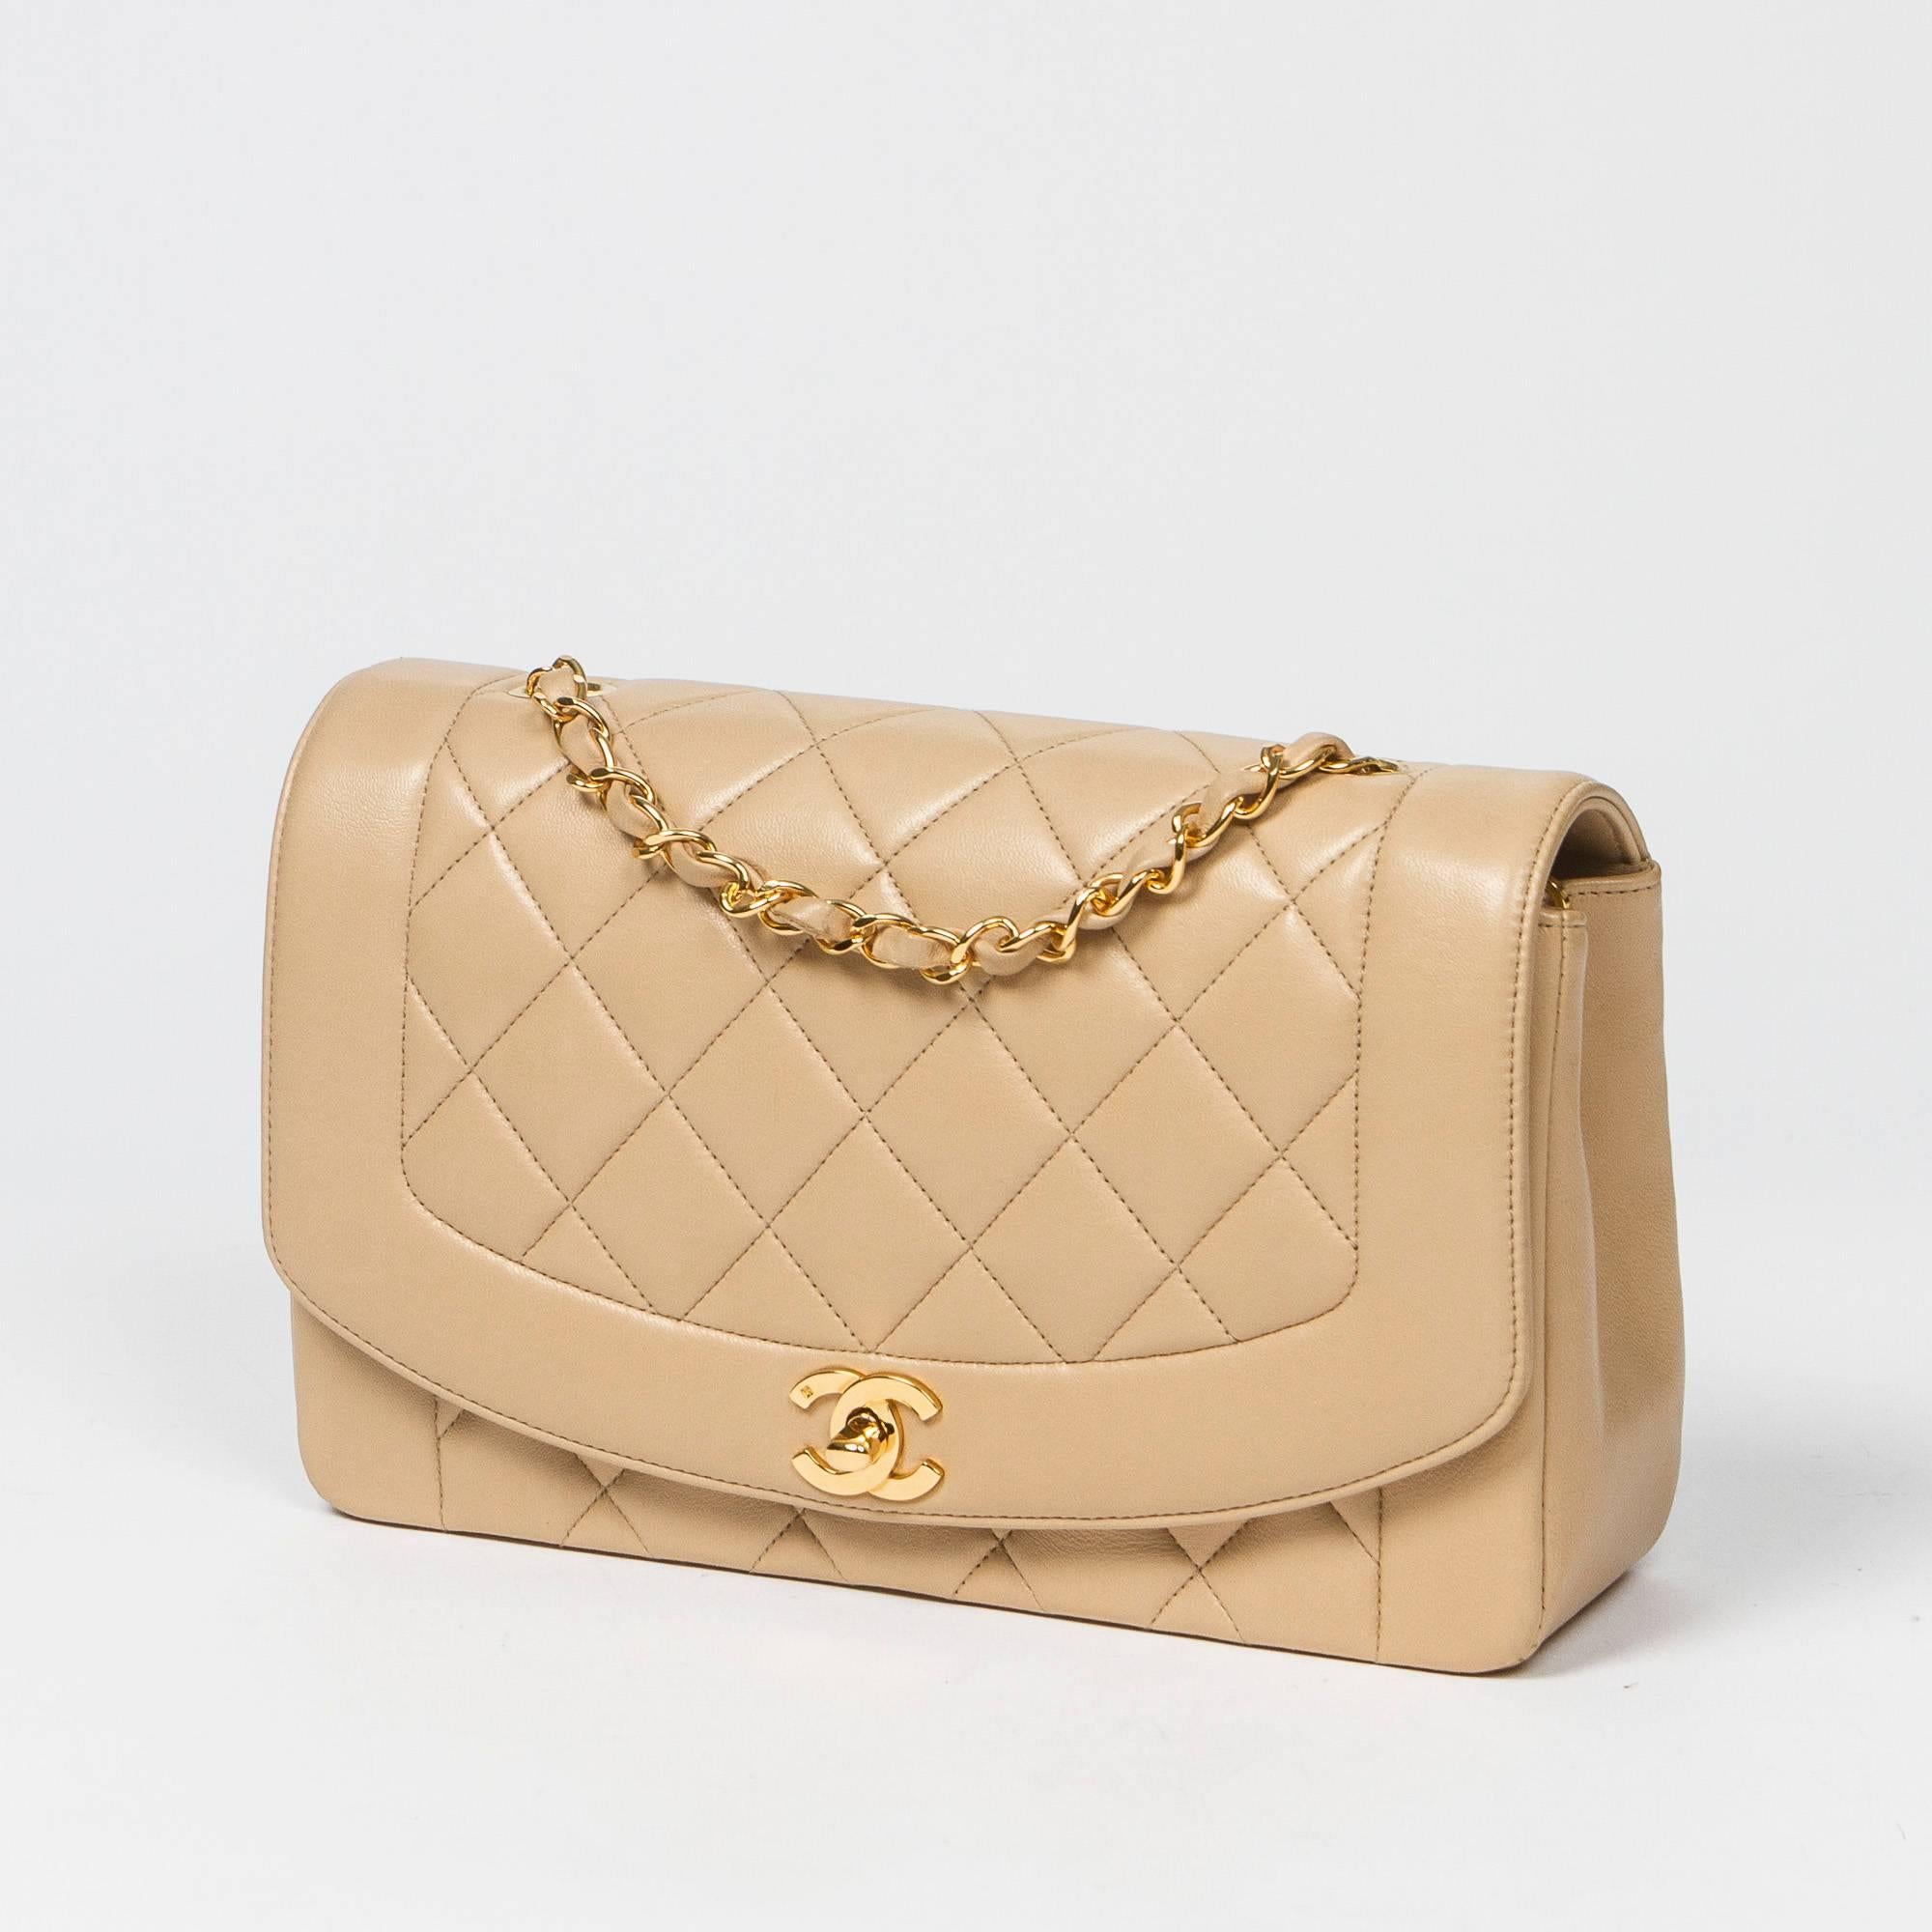 Mademoiselle Flap in beige quilted calf leather, double chain strap interlaced with leather, signature turnlock closure, gold tone hardware. Back slip pocket. Beige leather lined interior with 3 slip pockets. Gold tone heat stamp 